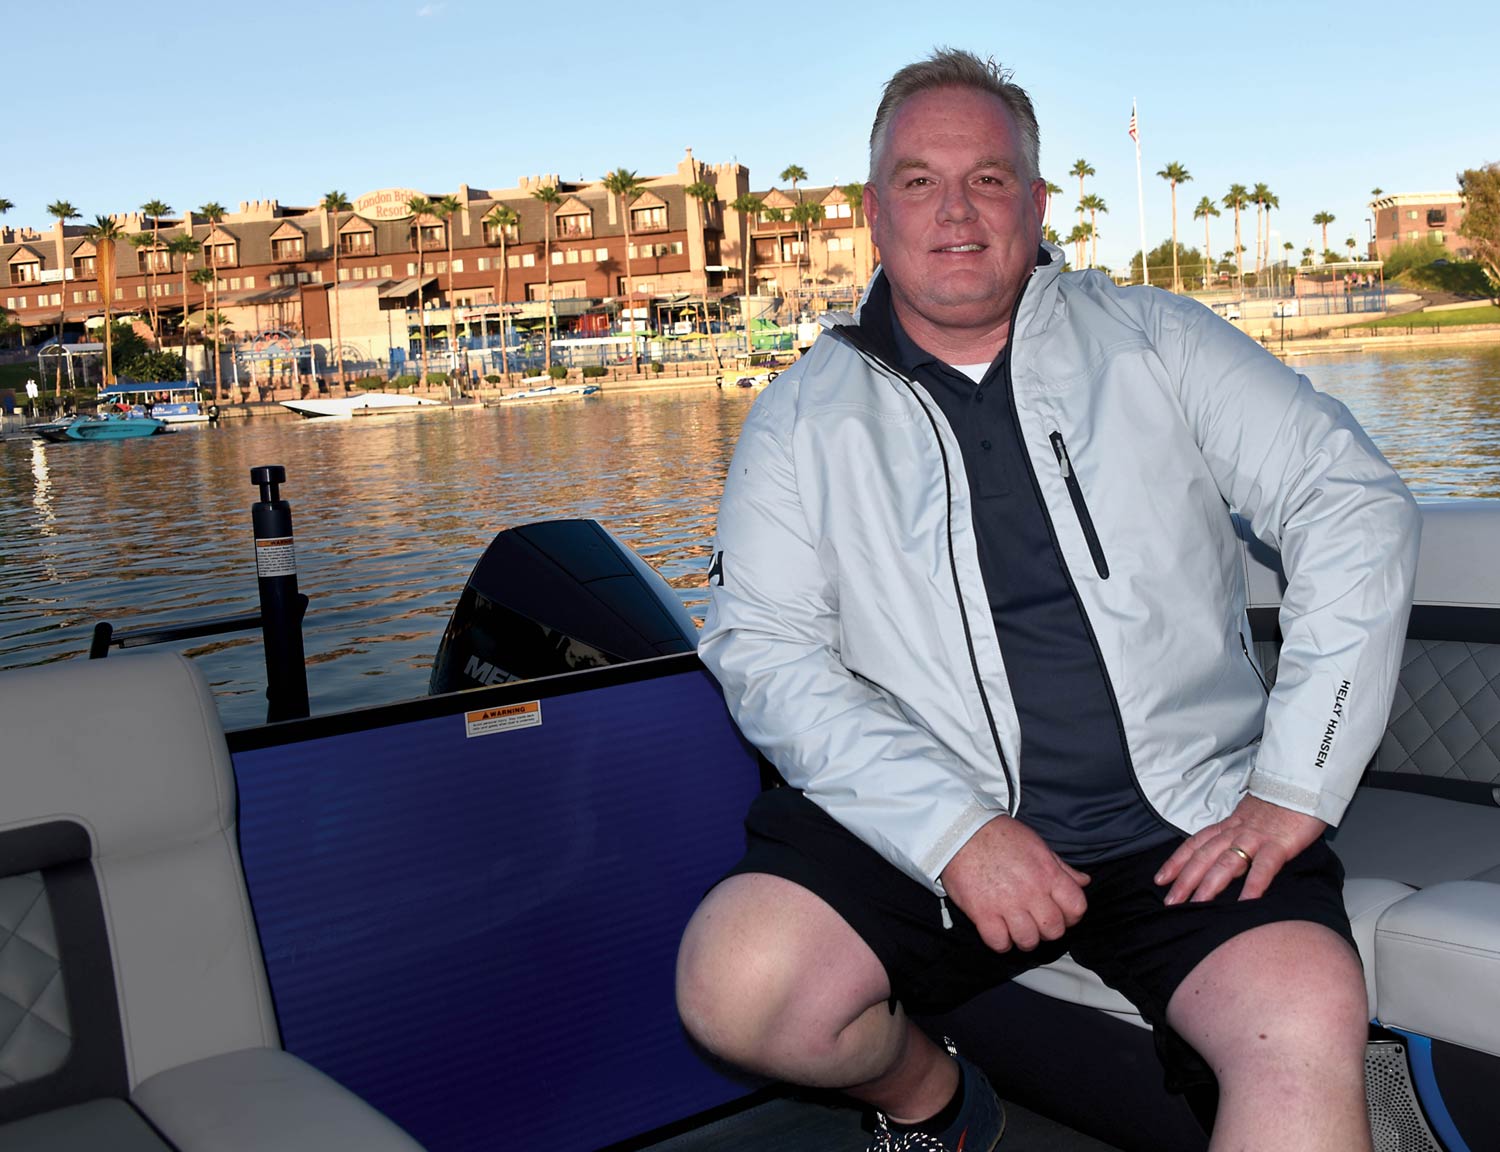 Brady L. Kay smiles and poses for a photograph outdoors on a clear sunny day as he sits back on a grey sofa couch inside a motorboat vehicle wearing a grey Helly Hansen branded crew midlayer sailing jacket